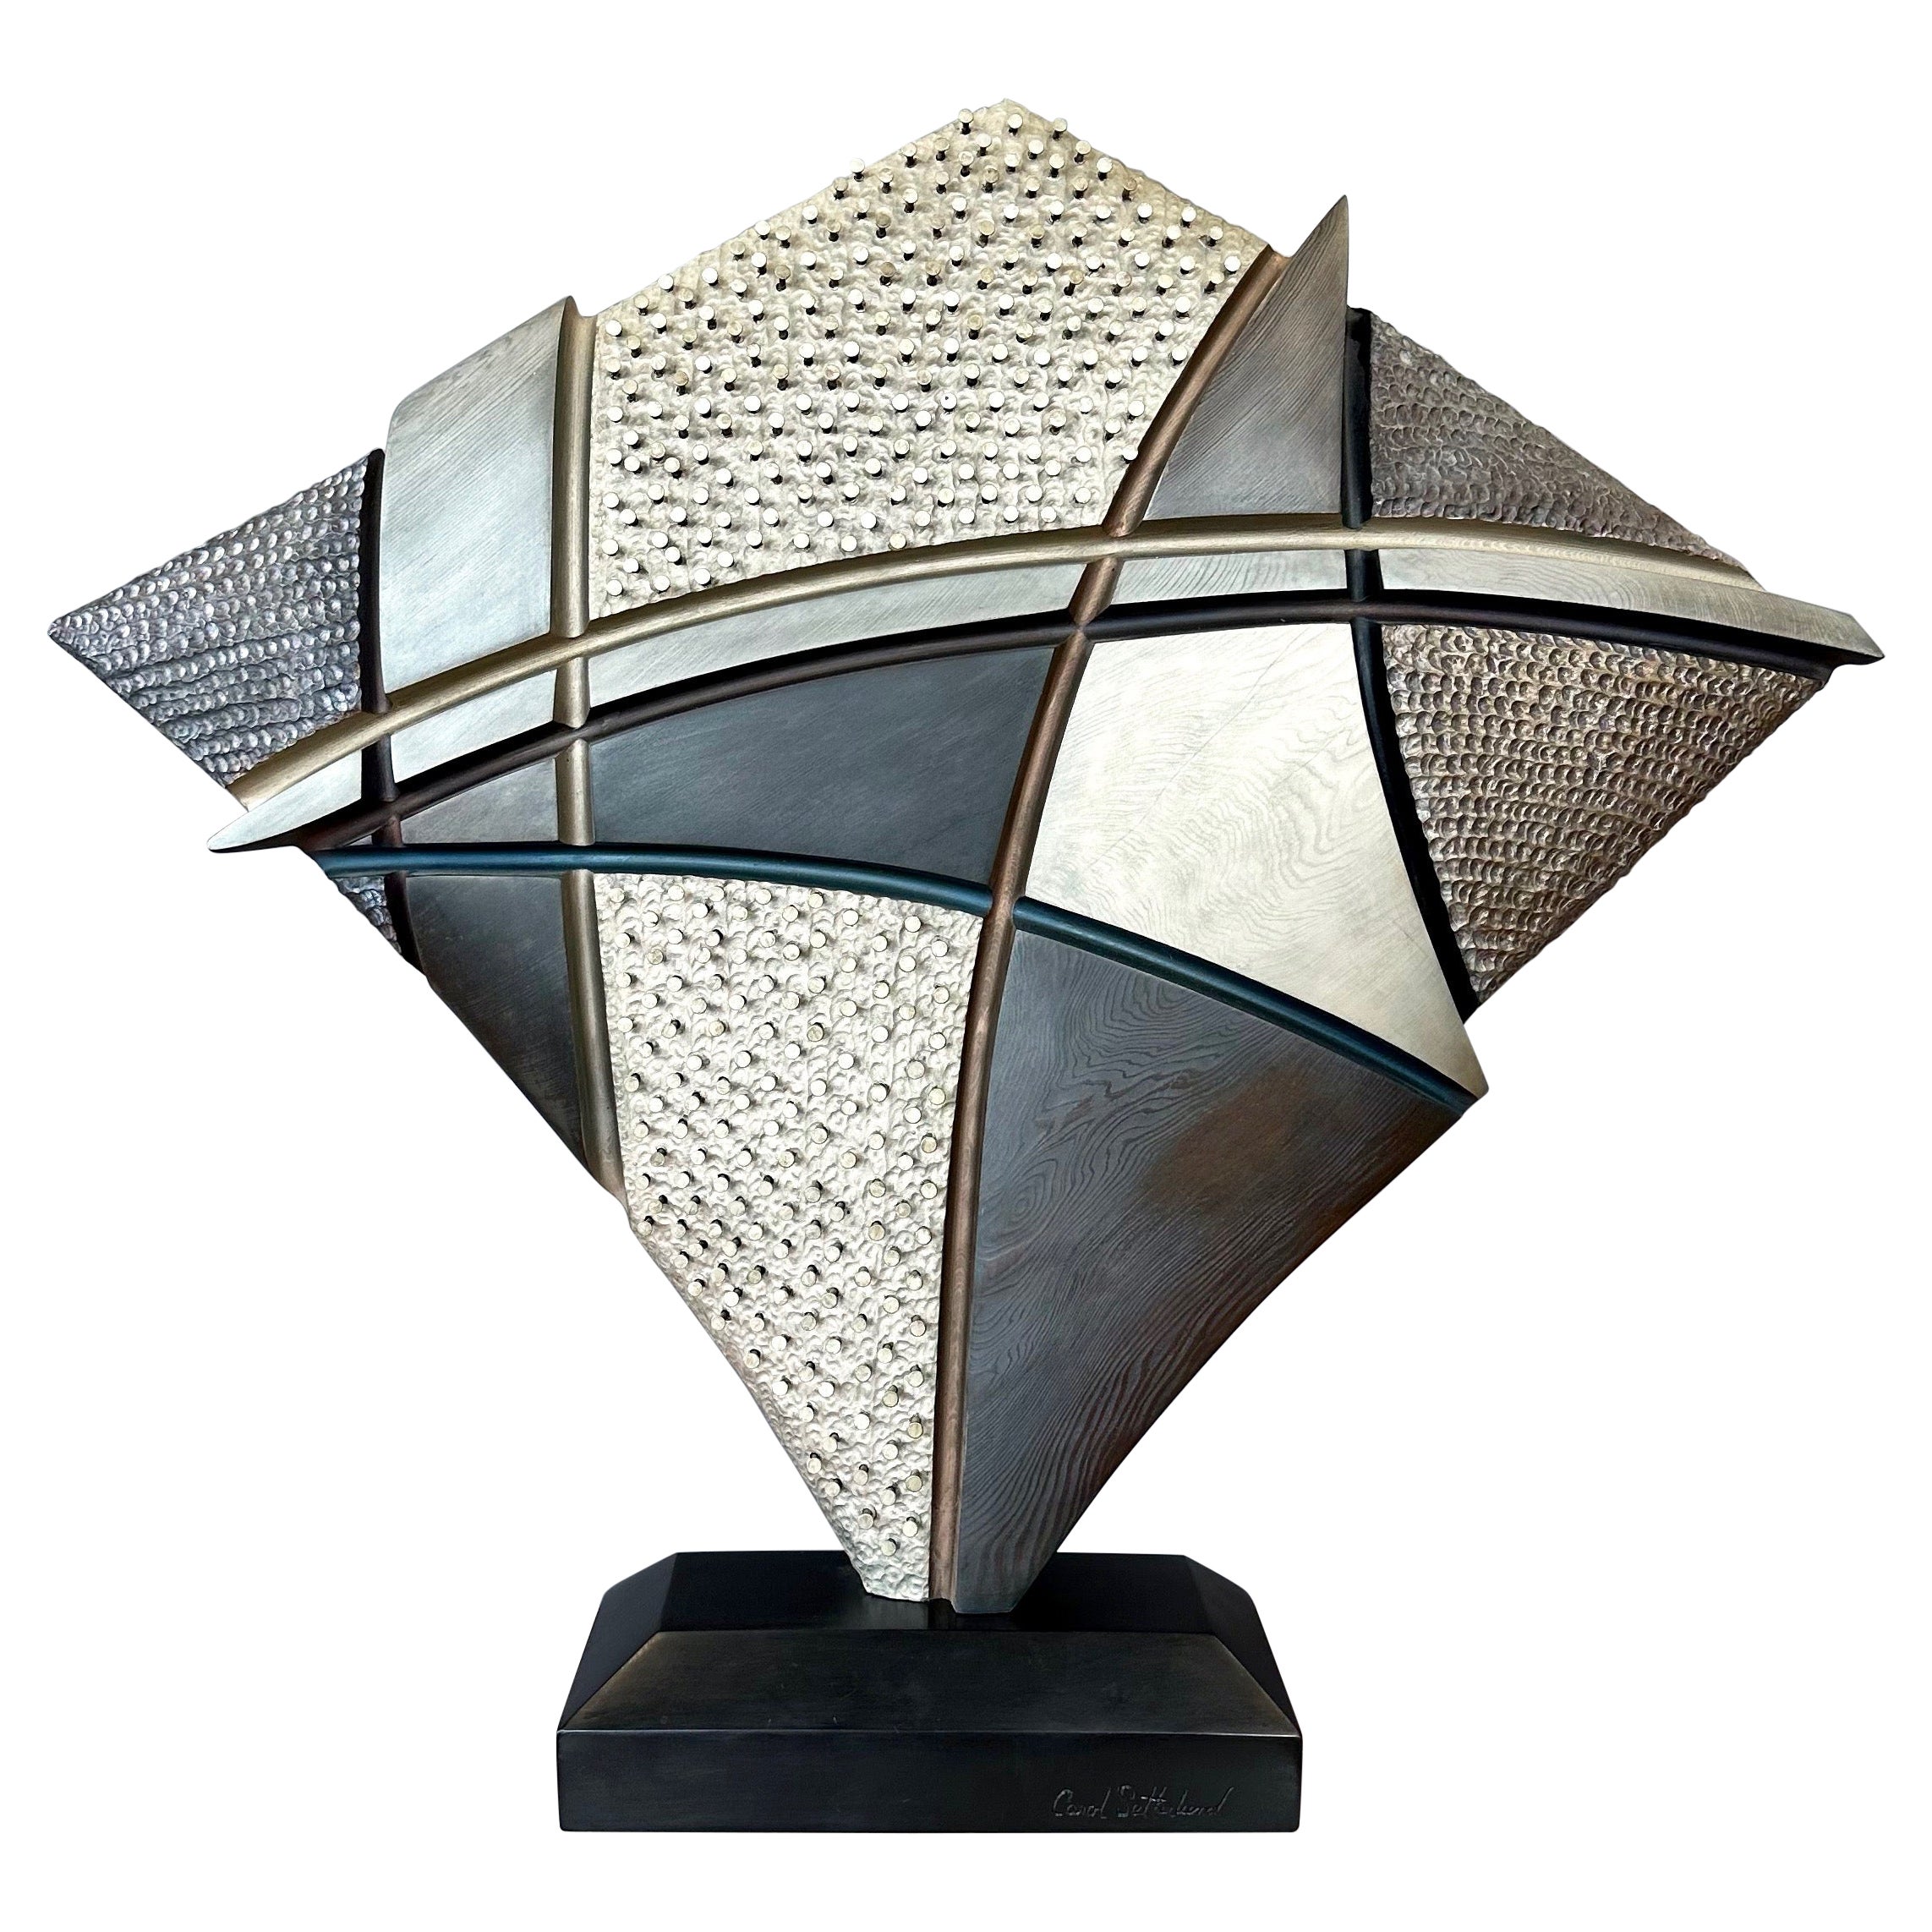 Carol Setterlund, “Martyr’s Shield”, Abstract Mixed-Media Wood Sculpture, 1980s